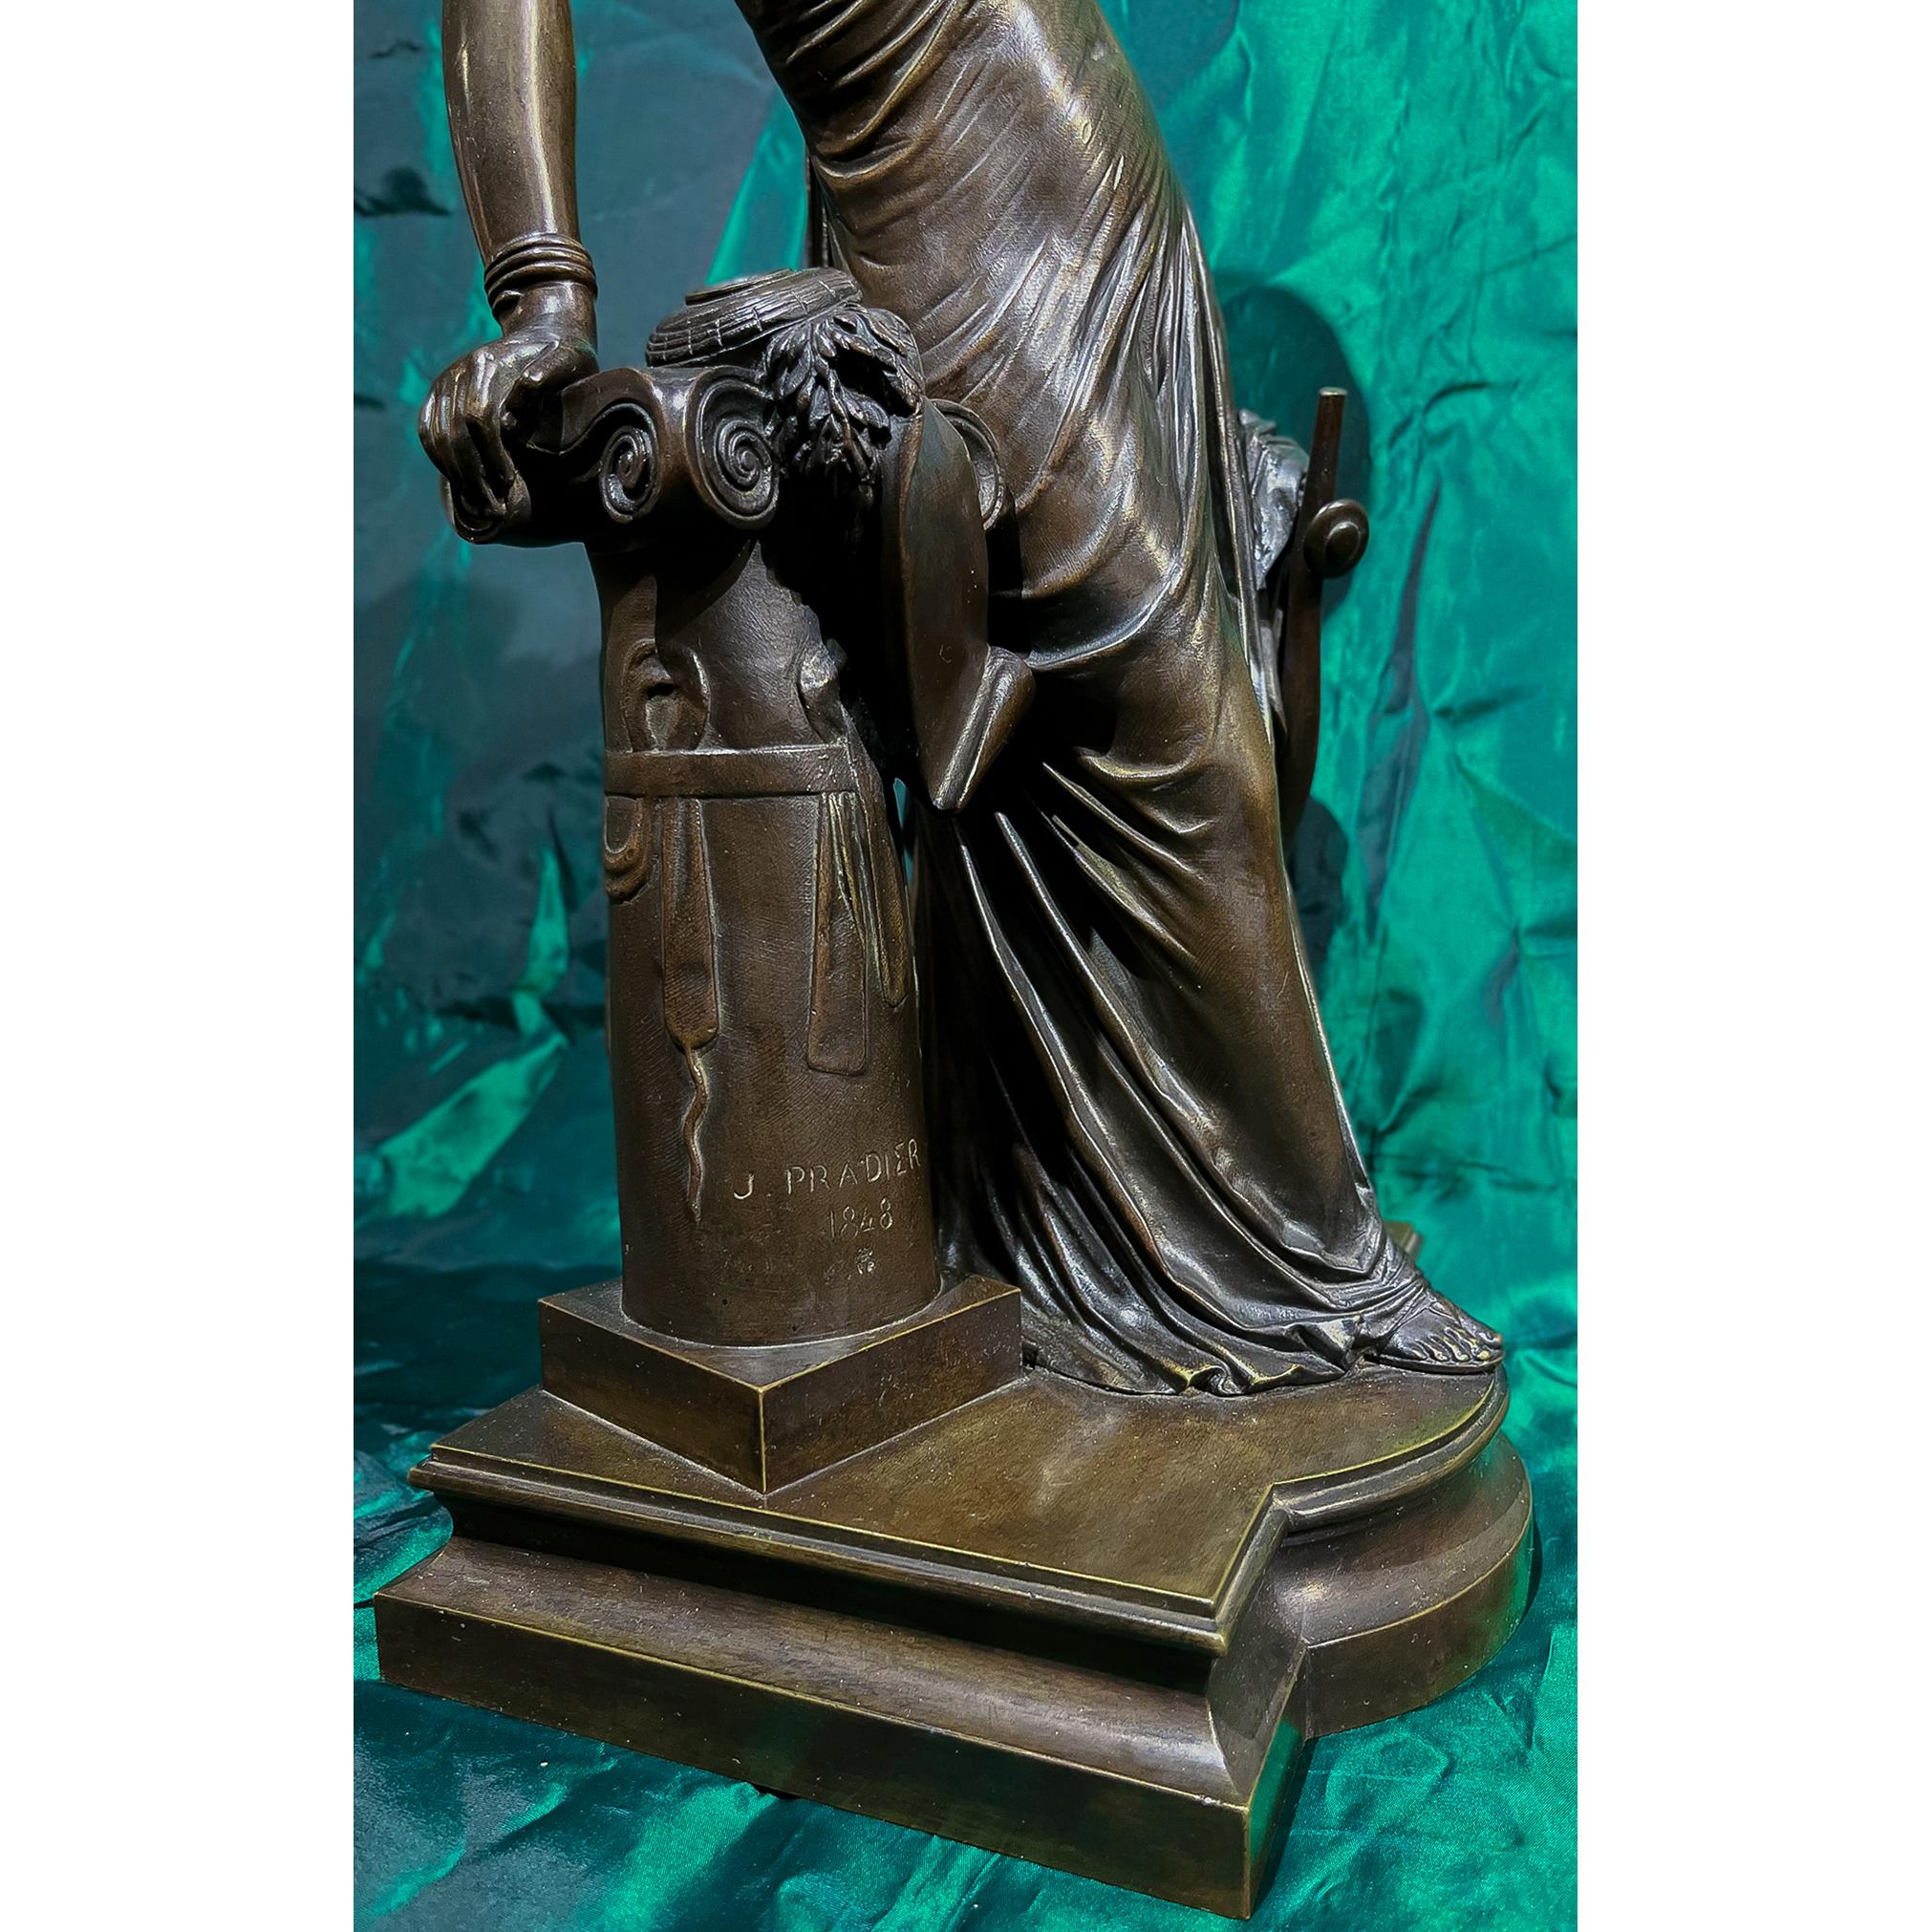 French bronze of Sappho Leaning Against a Column Holding Her tortoise Lyre, Original rich brown patina intact. 

Artist: Jean Jacques Pradier (Swiss 1790-1852), 

Signed 